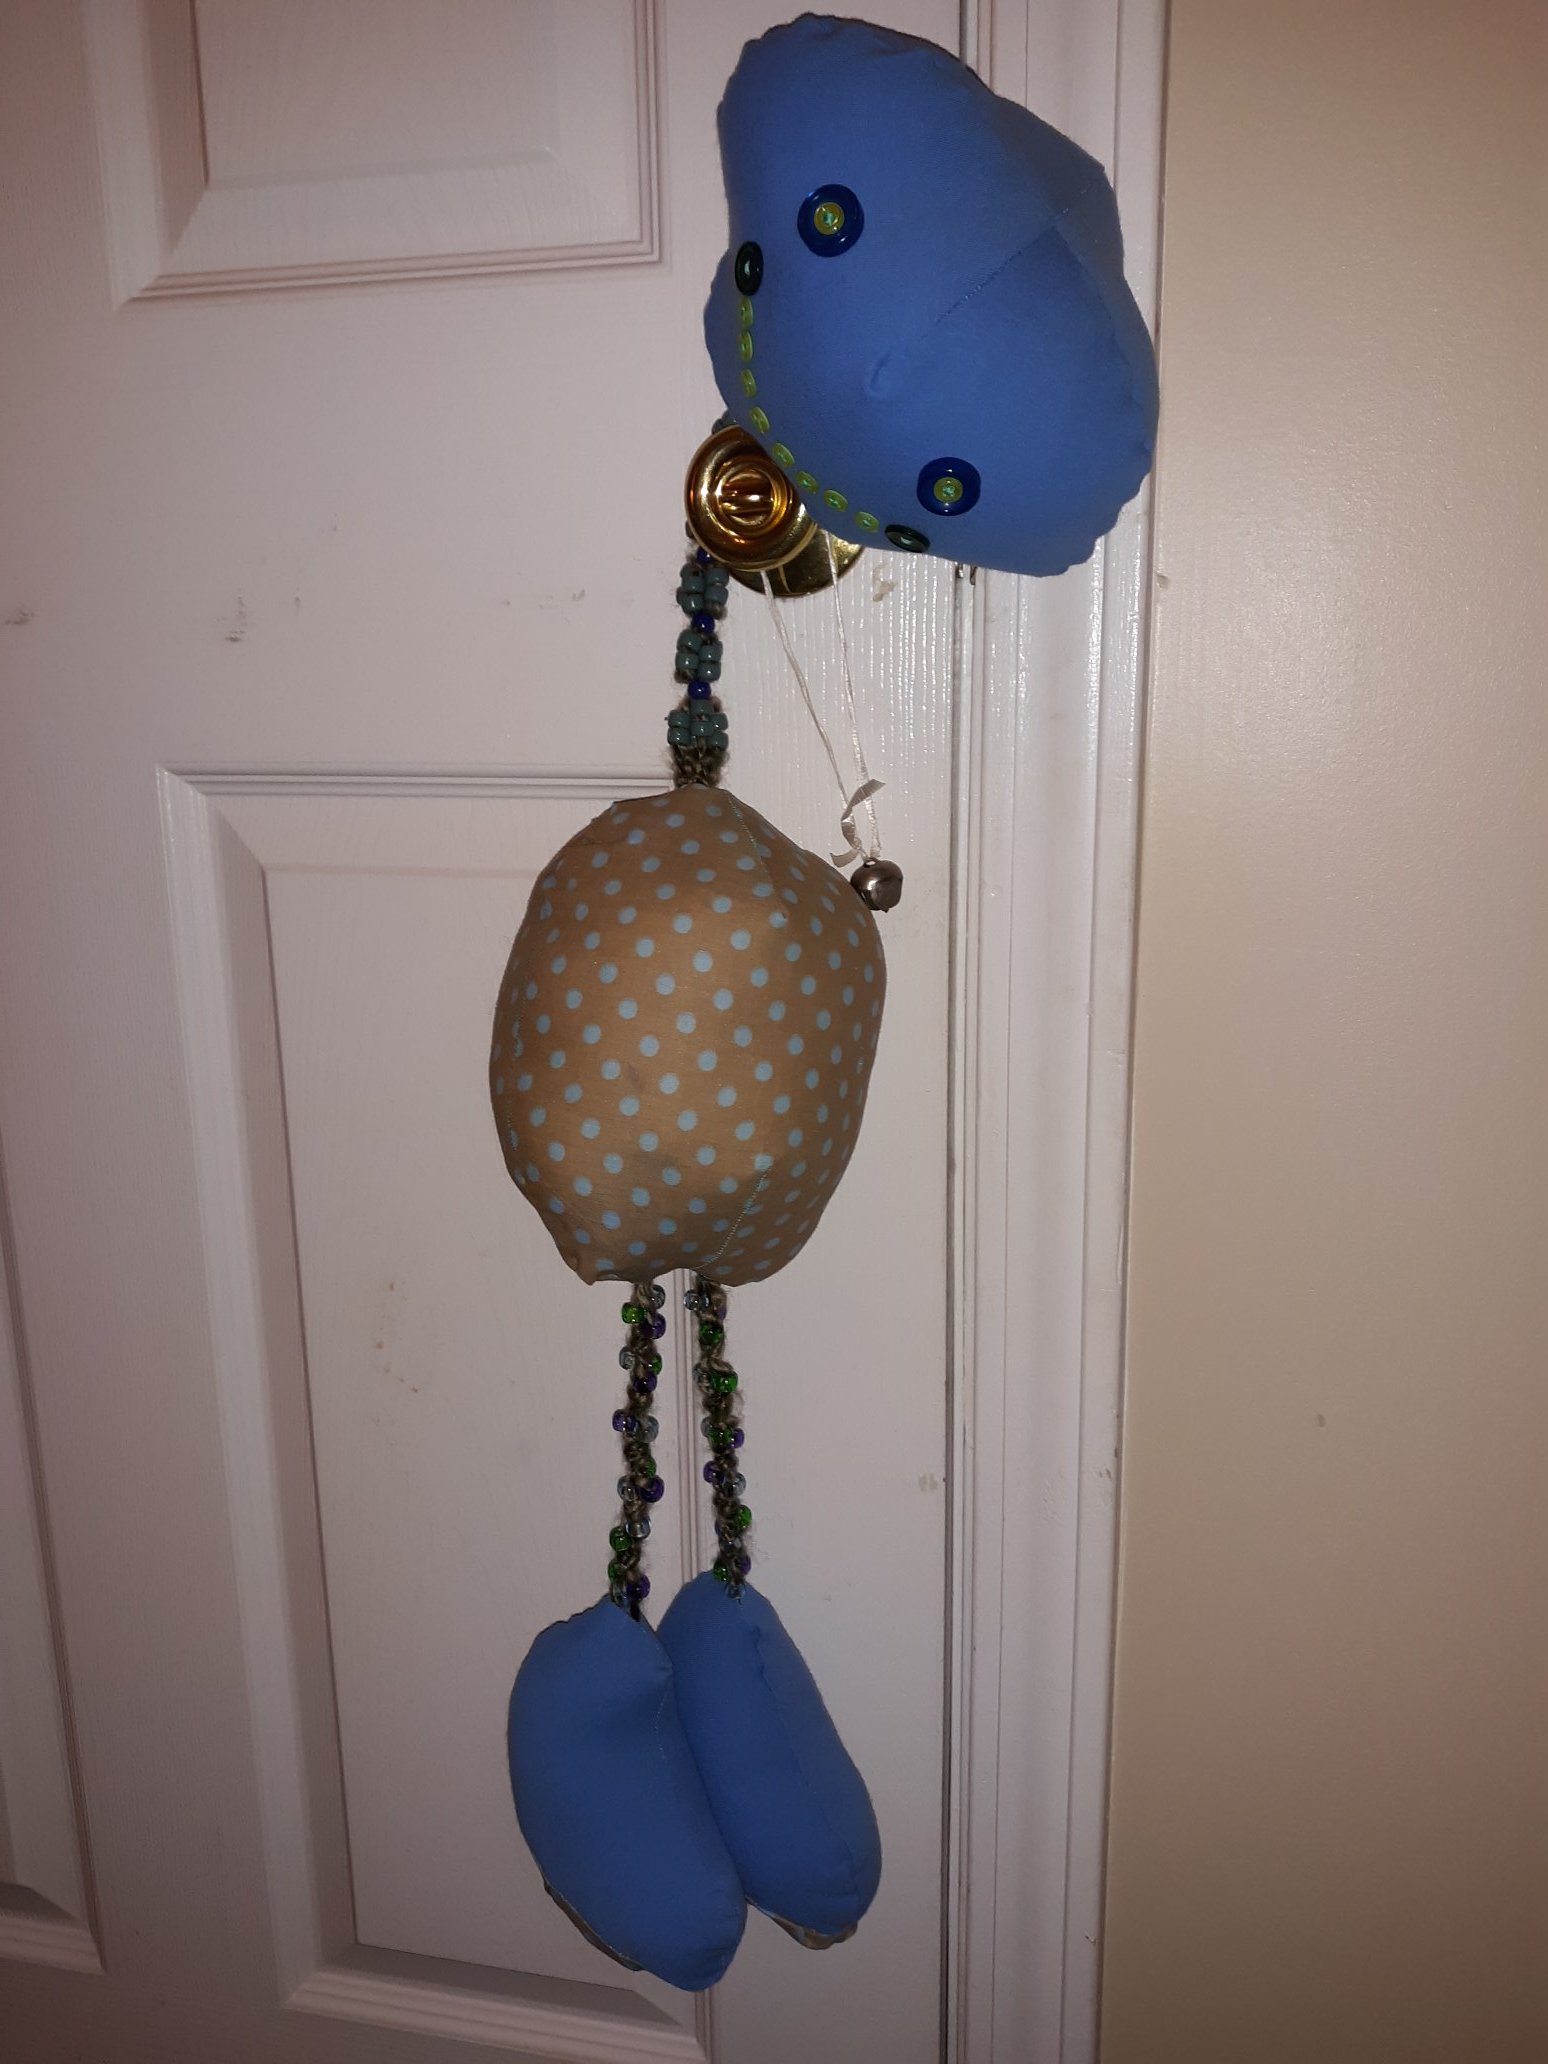 The same doll hanging off of a doorknob to show off the beaded neck and the beaded legs.